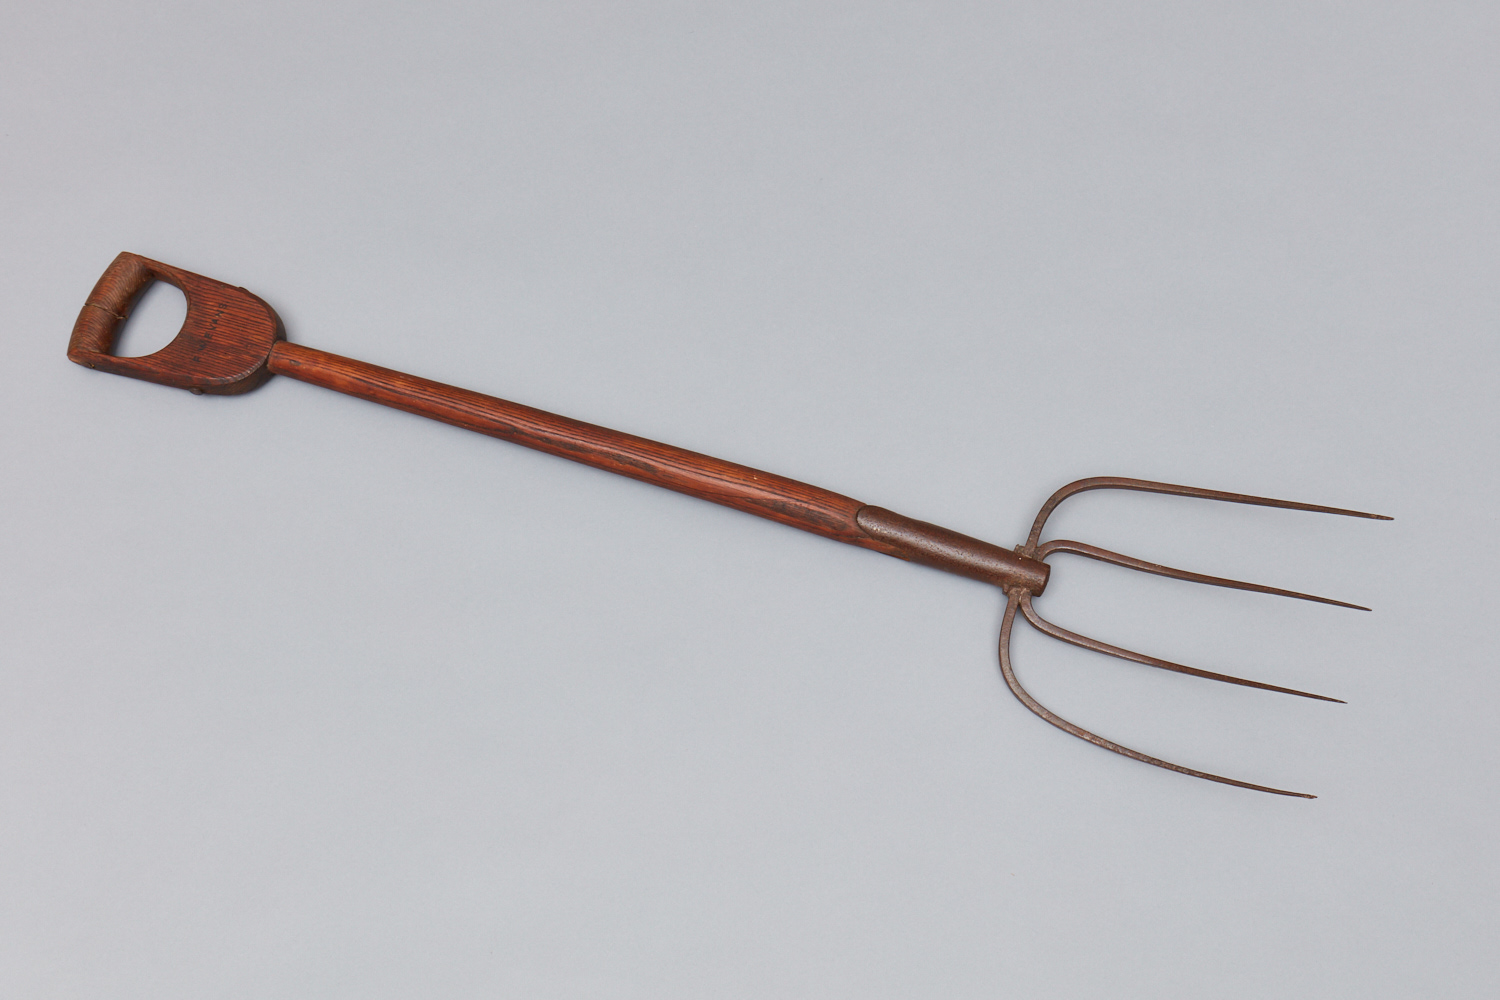 A garden fork with a wooden handle.